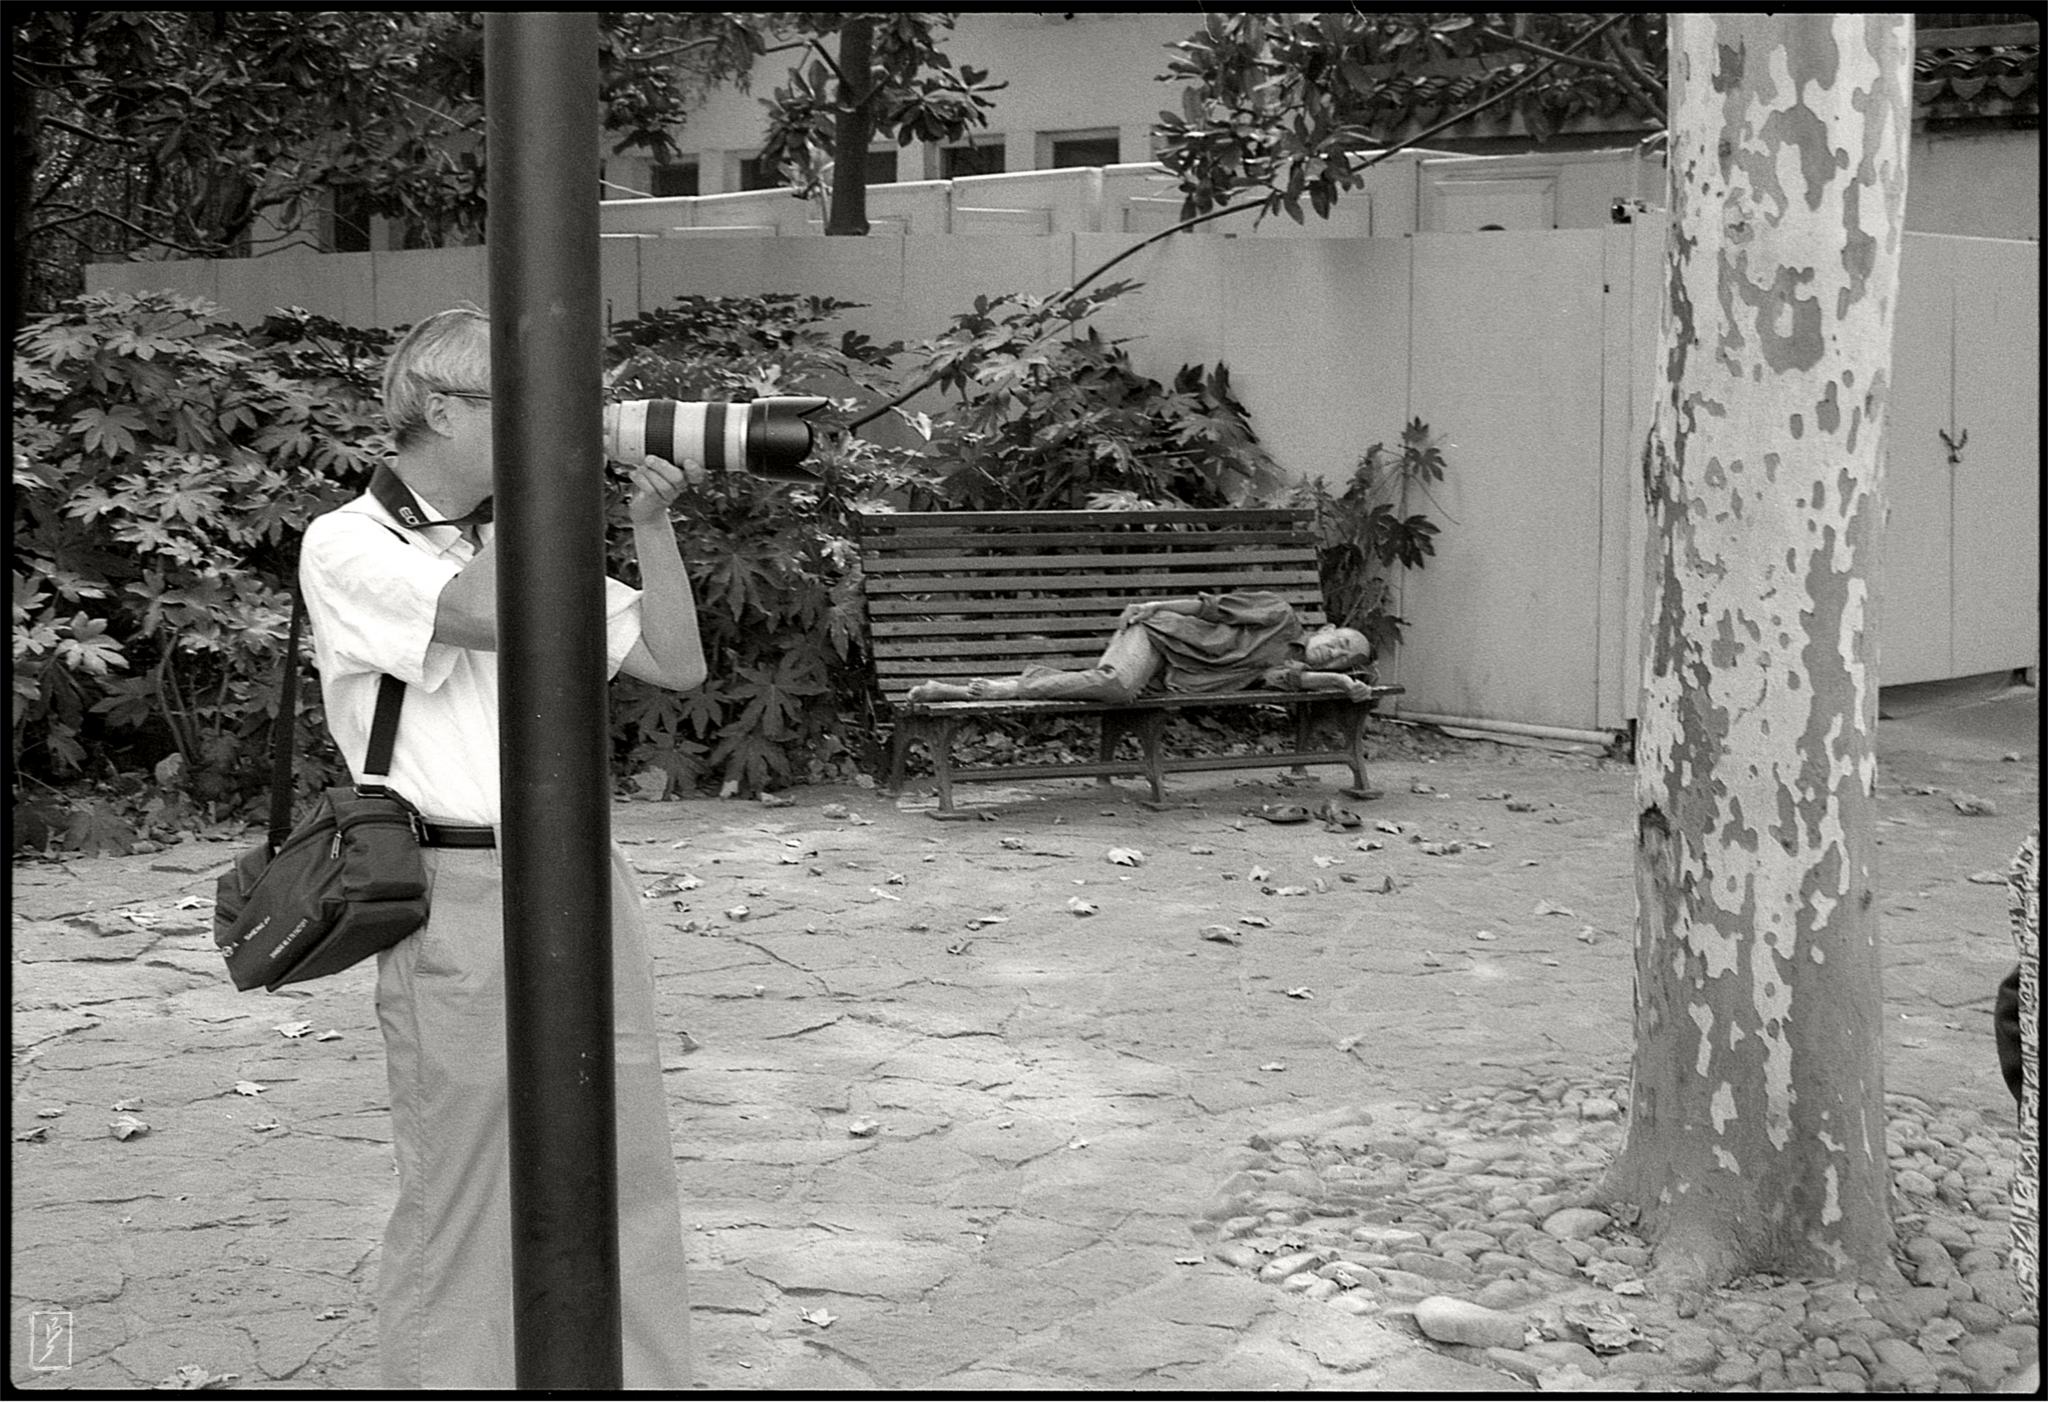 Lu Xun park (鲁迅公园): Photographer sporting a Canon and someone taking a nap on a bench.